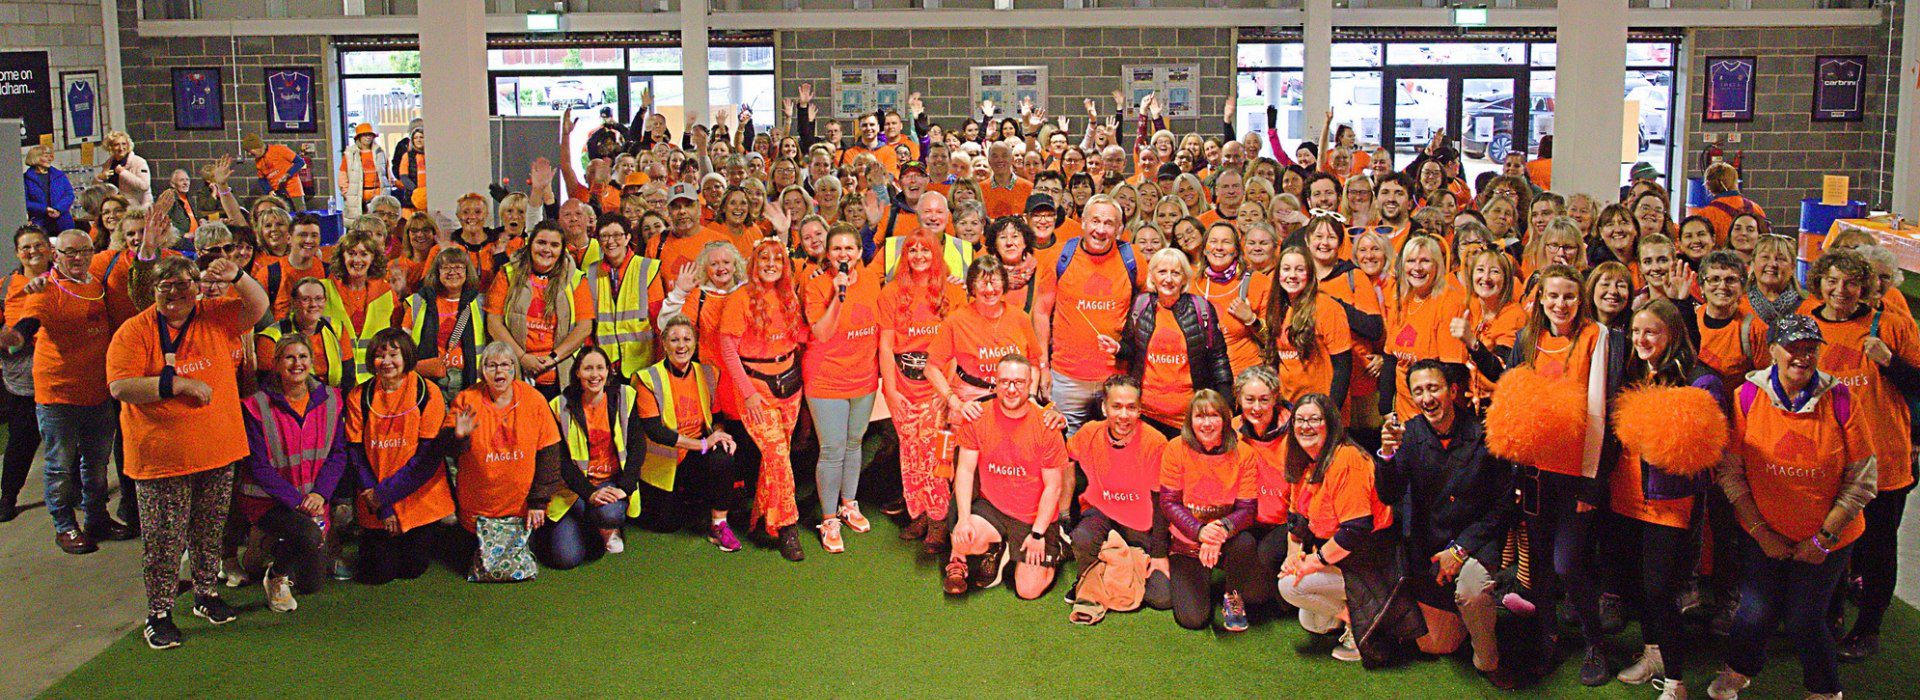 Group of nearly 100 participants, wearing orange Maggie's T-shirts, at a culture crawl fundraising for Maggie's Oldham